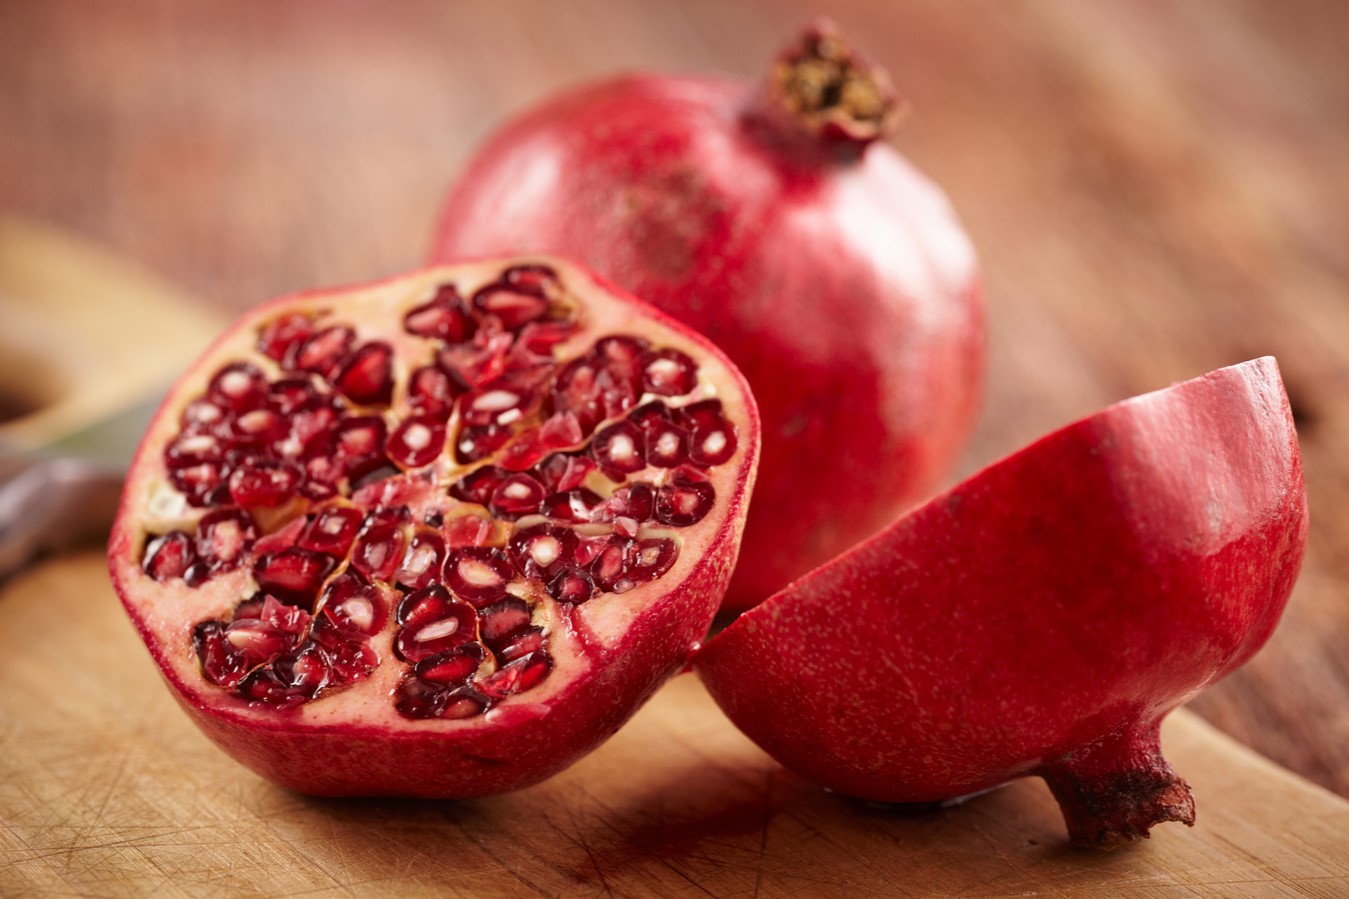 How To Tell When A Pomegranate Is Ripe